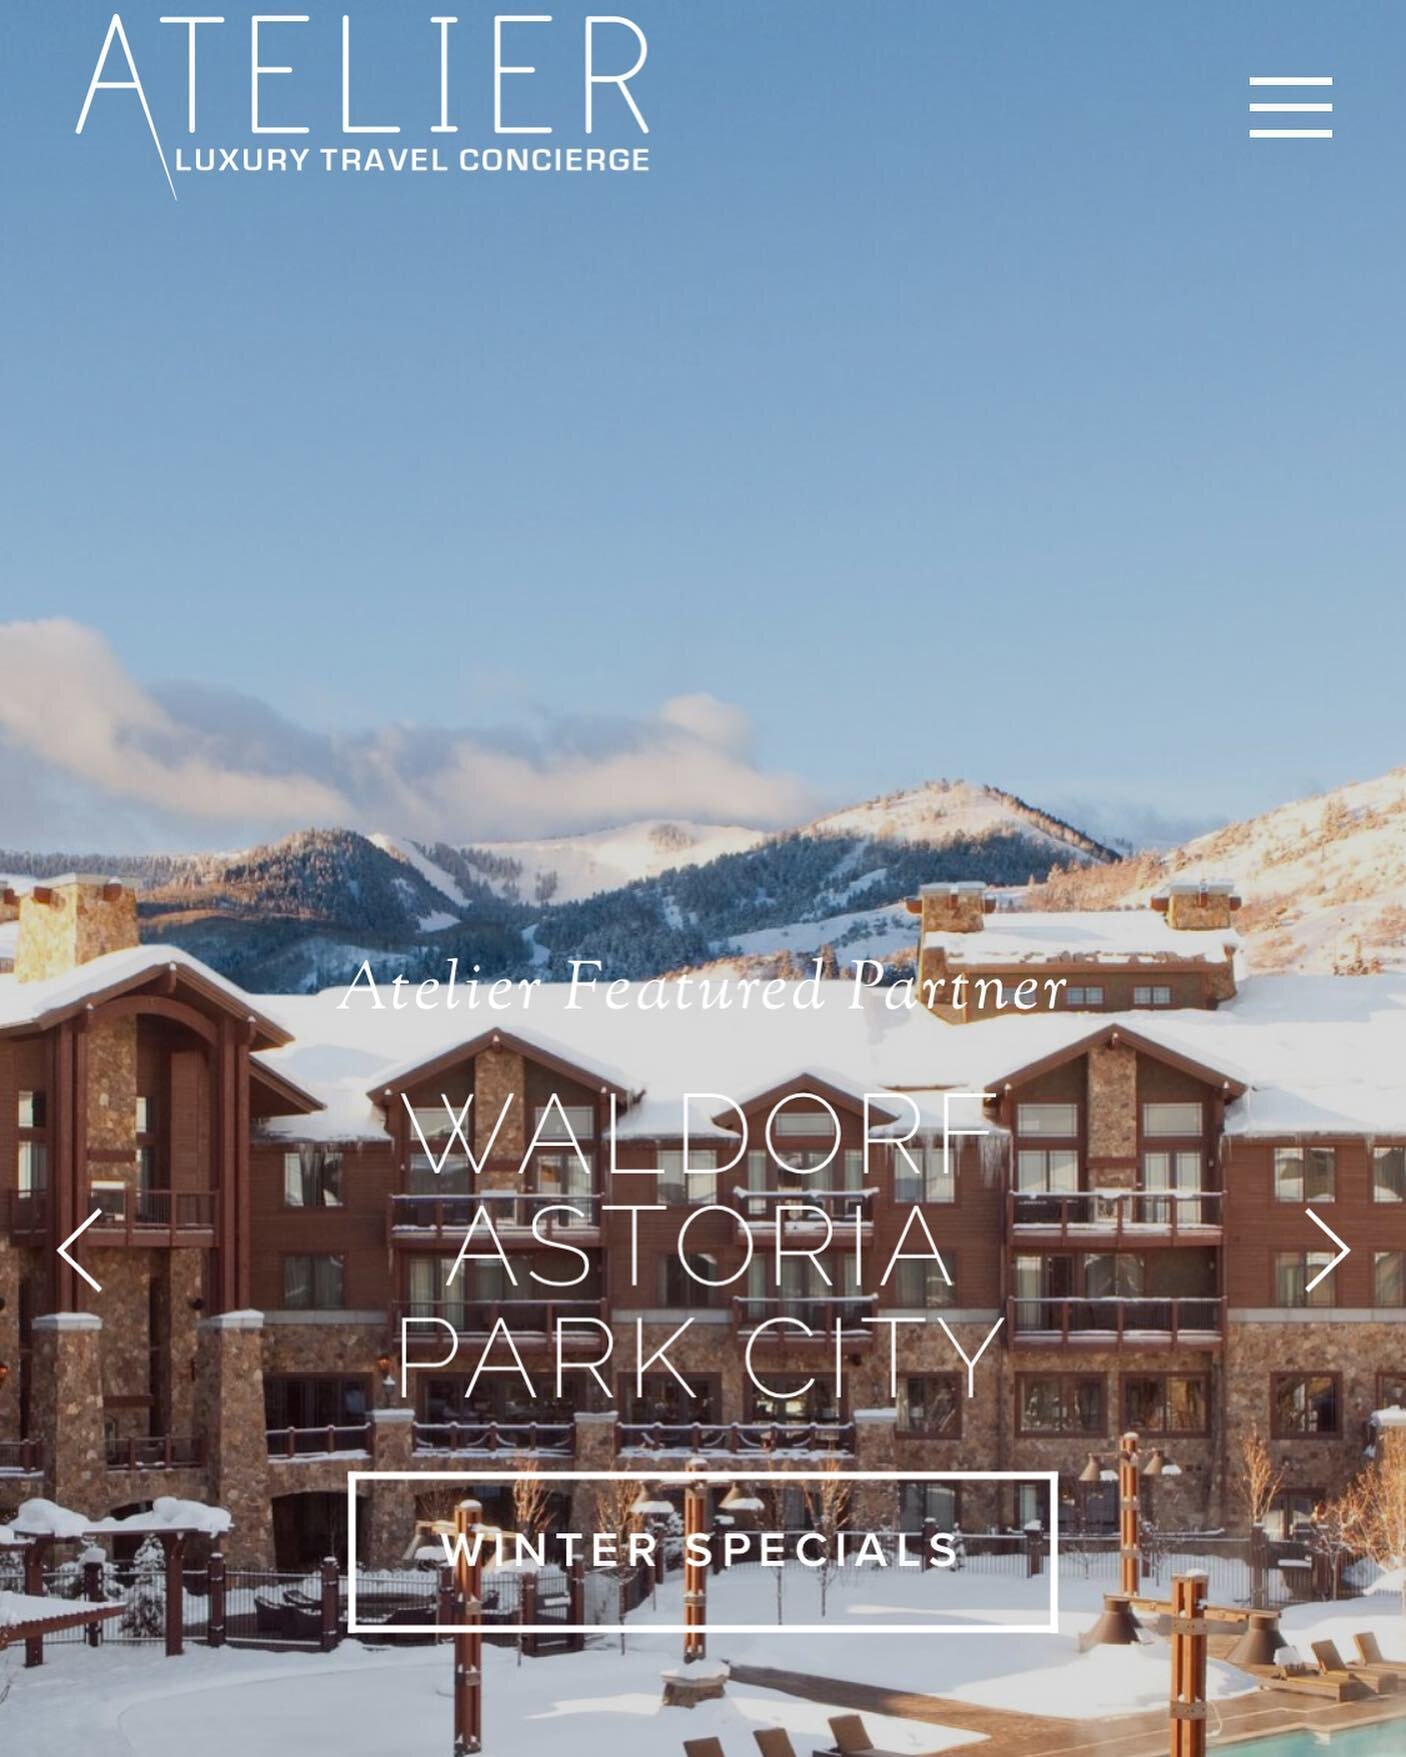 Website has been updated with a new featured partner @waldorfparkcity! Check out my link in bio. Www.ateliertravelconcierge.com

There&rsquo;s some great winter specials the last month or so of winter and we will be getting the spring specials up soo